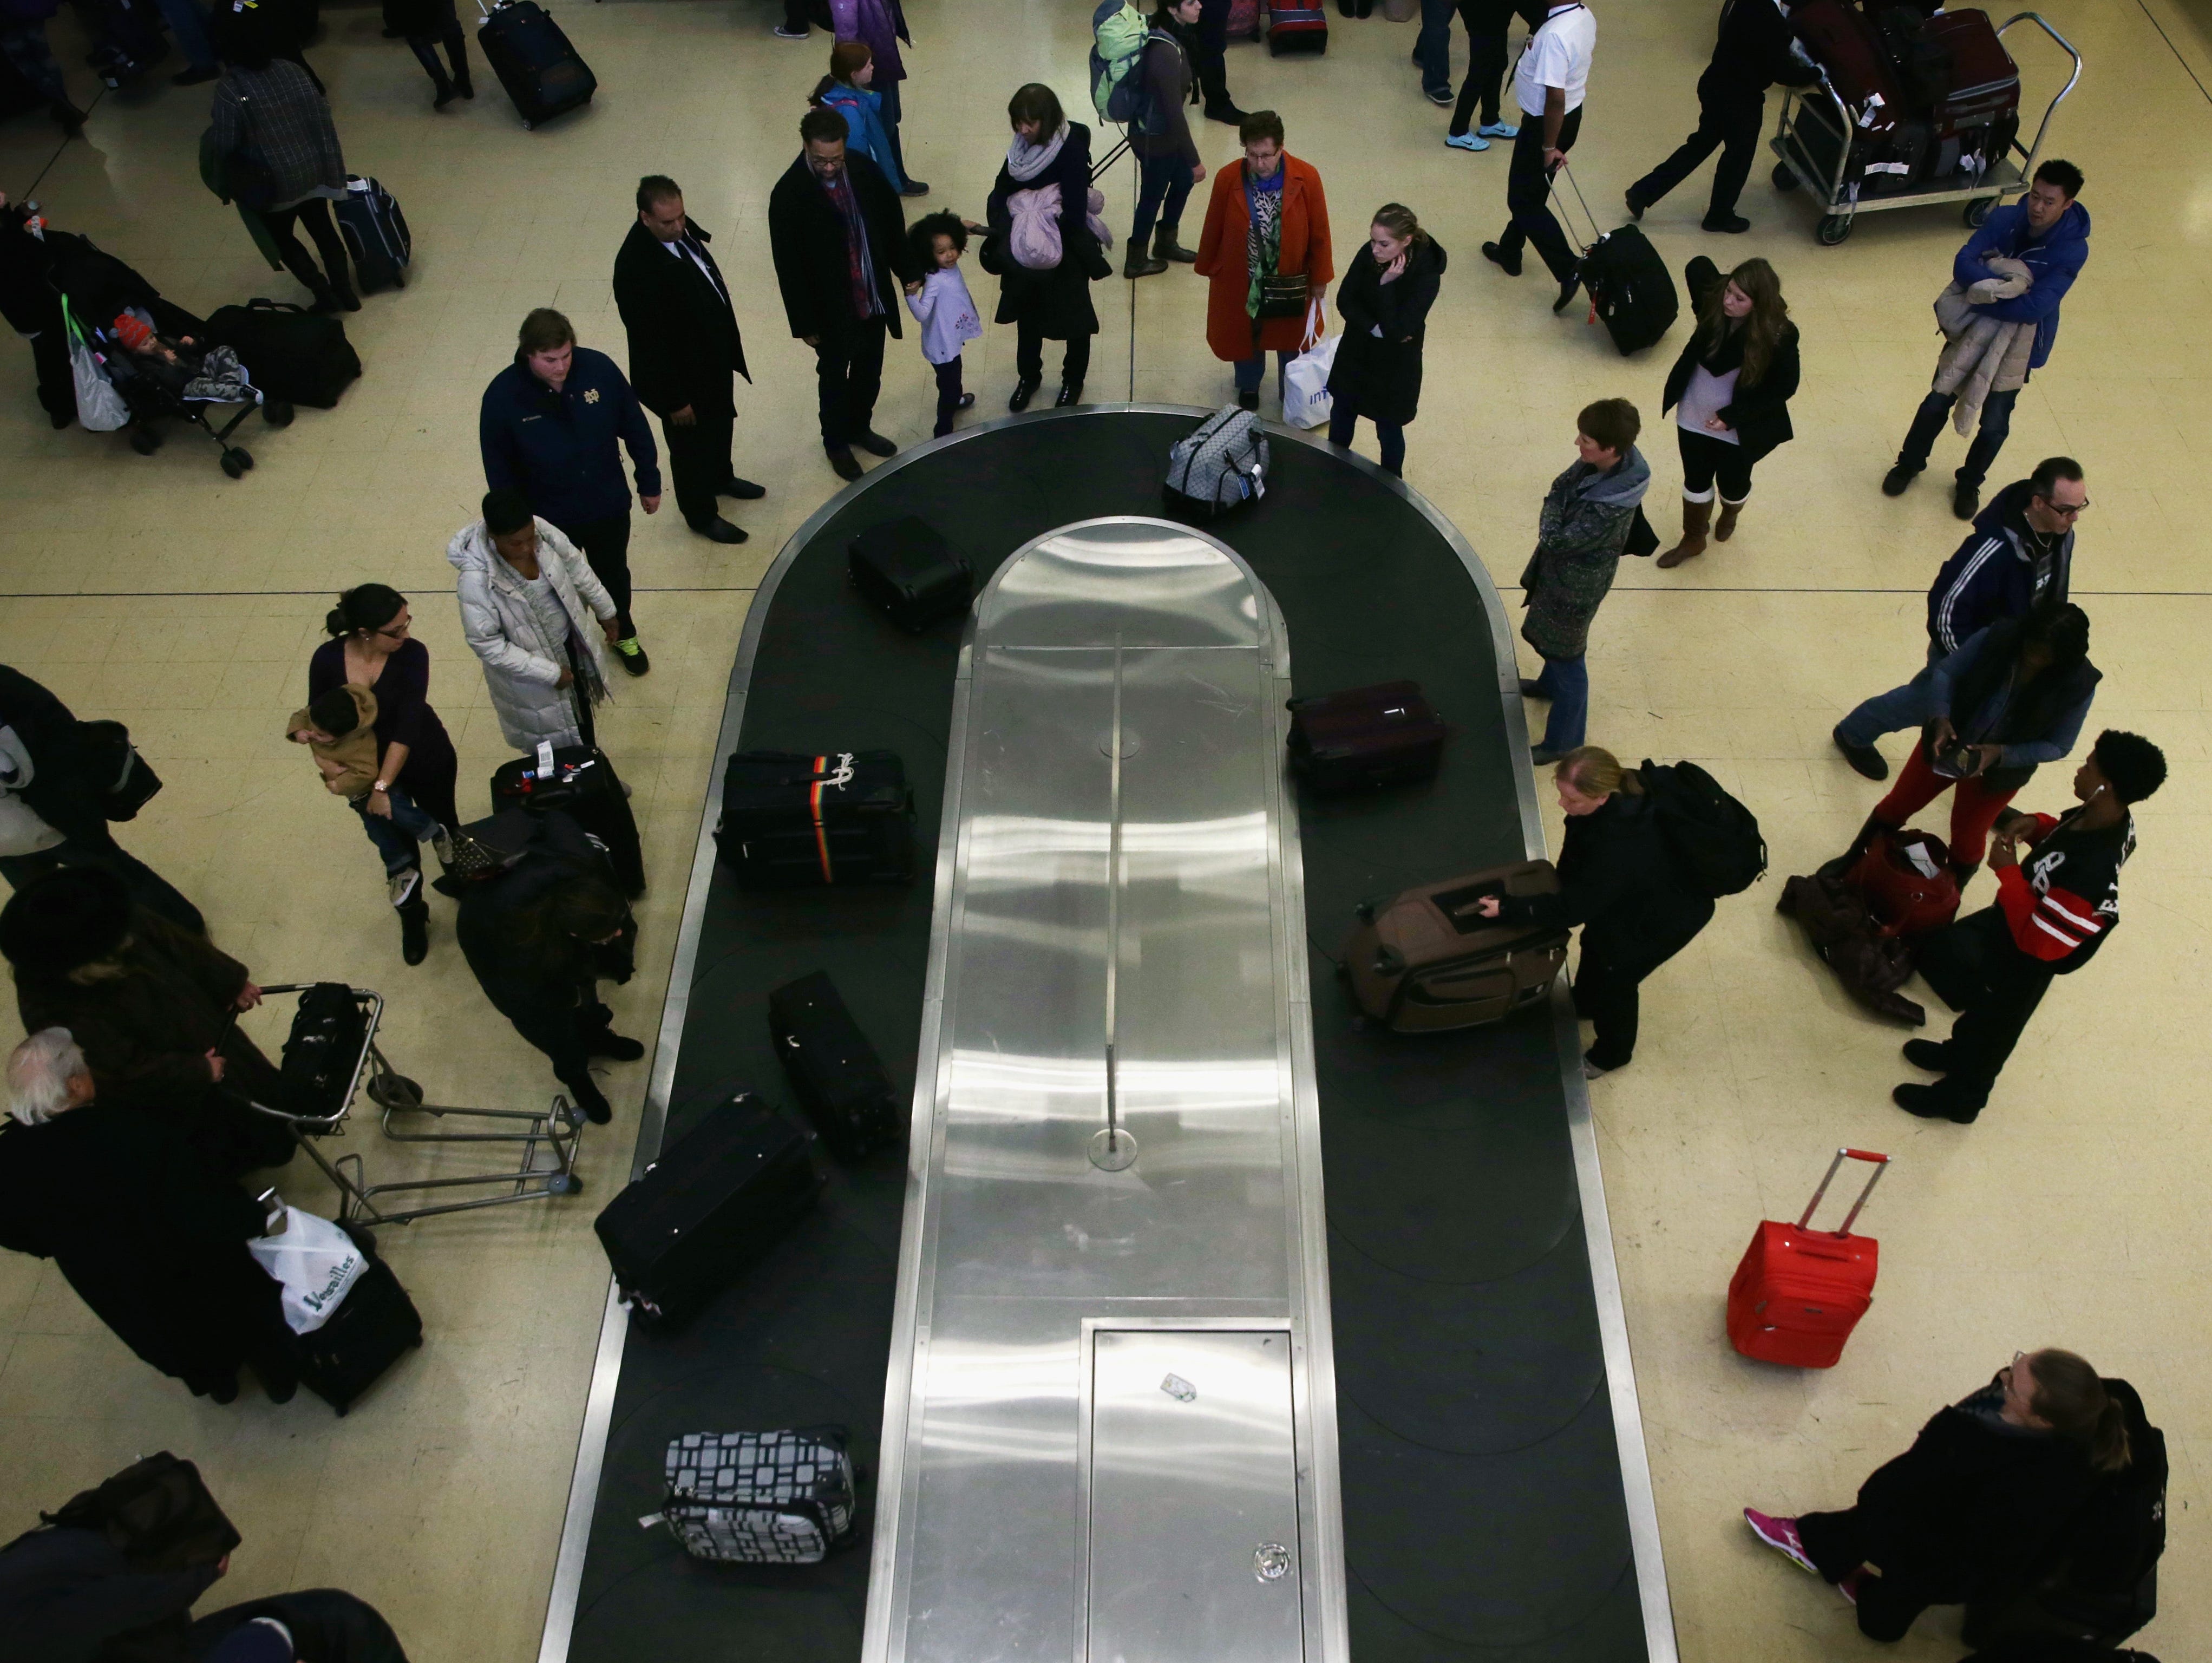 Travelers wait for their luggage after arriving at Washington Reagan National Airport on Nov. 26, 2014.